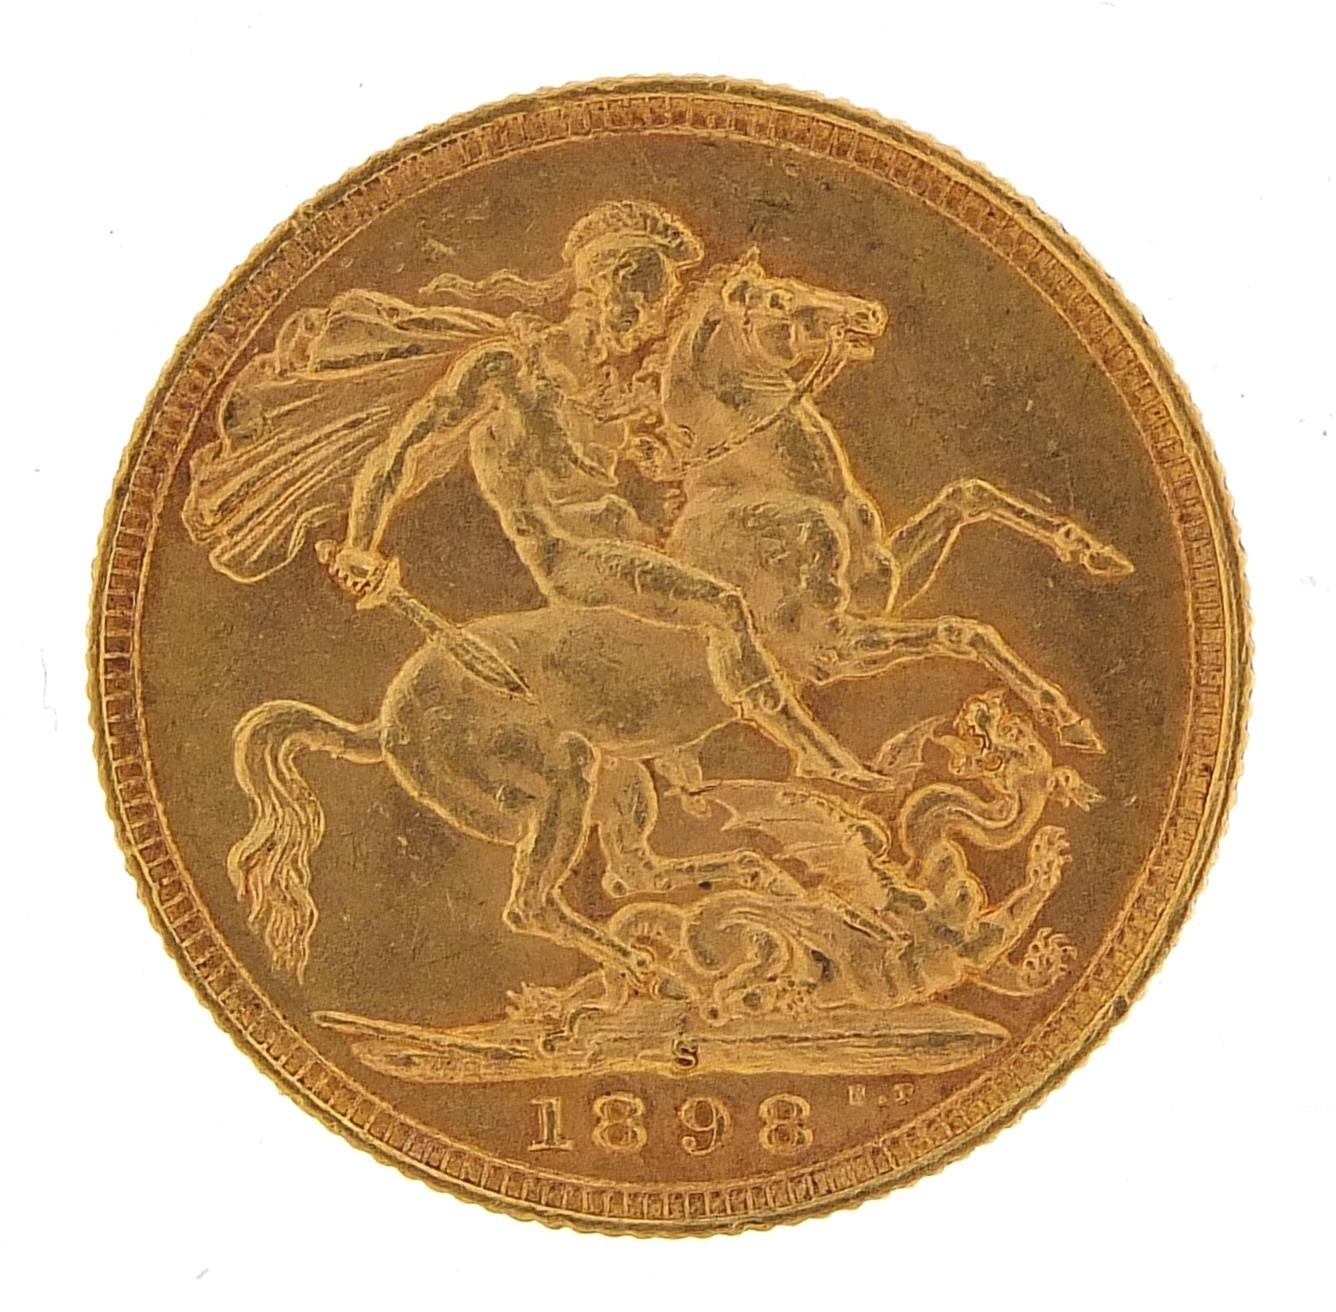 Queen Victoria 1898 gold sovereign, Sydney mint - this lot is sold without buyer's premium